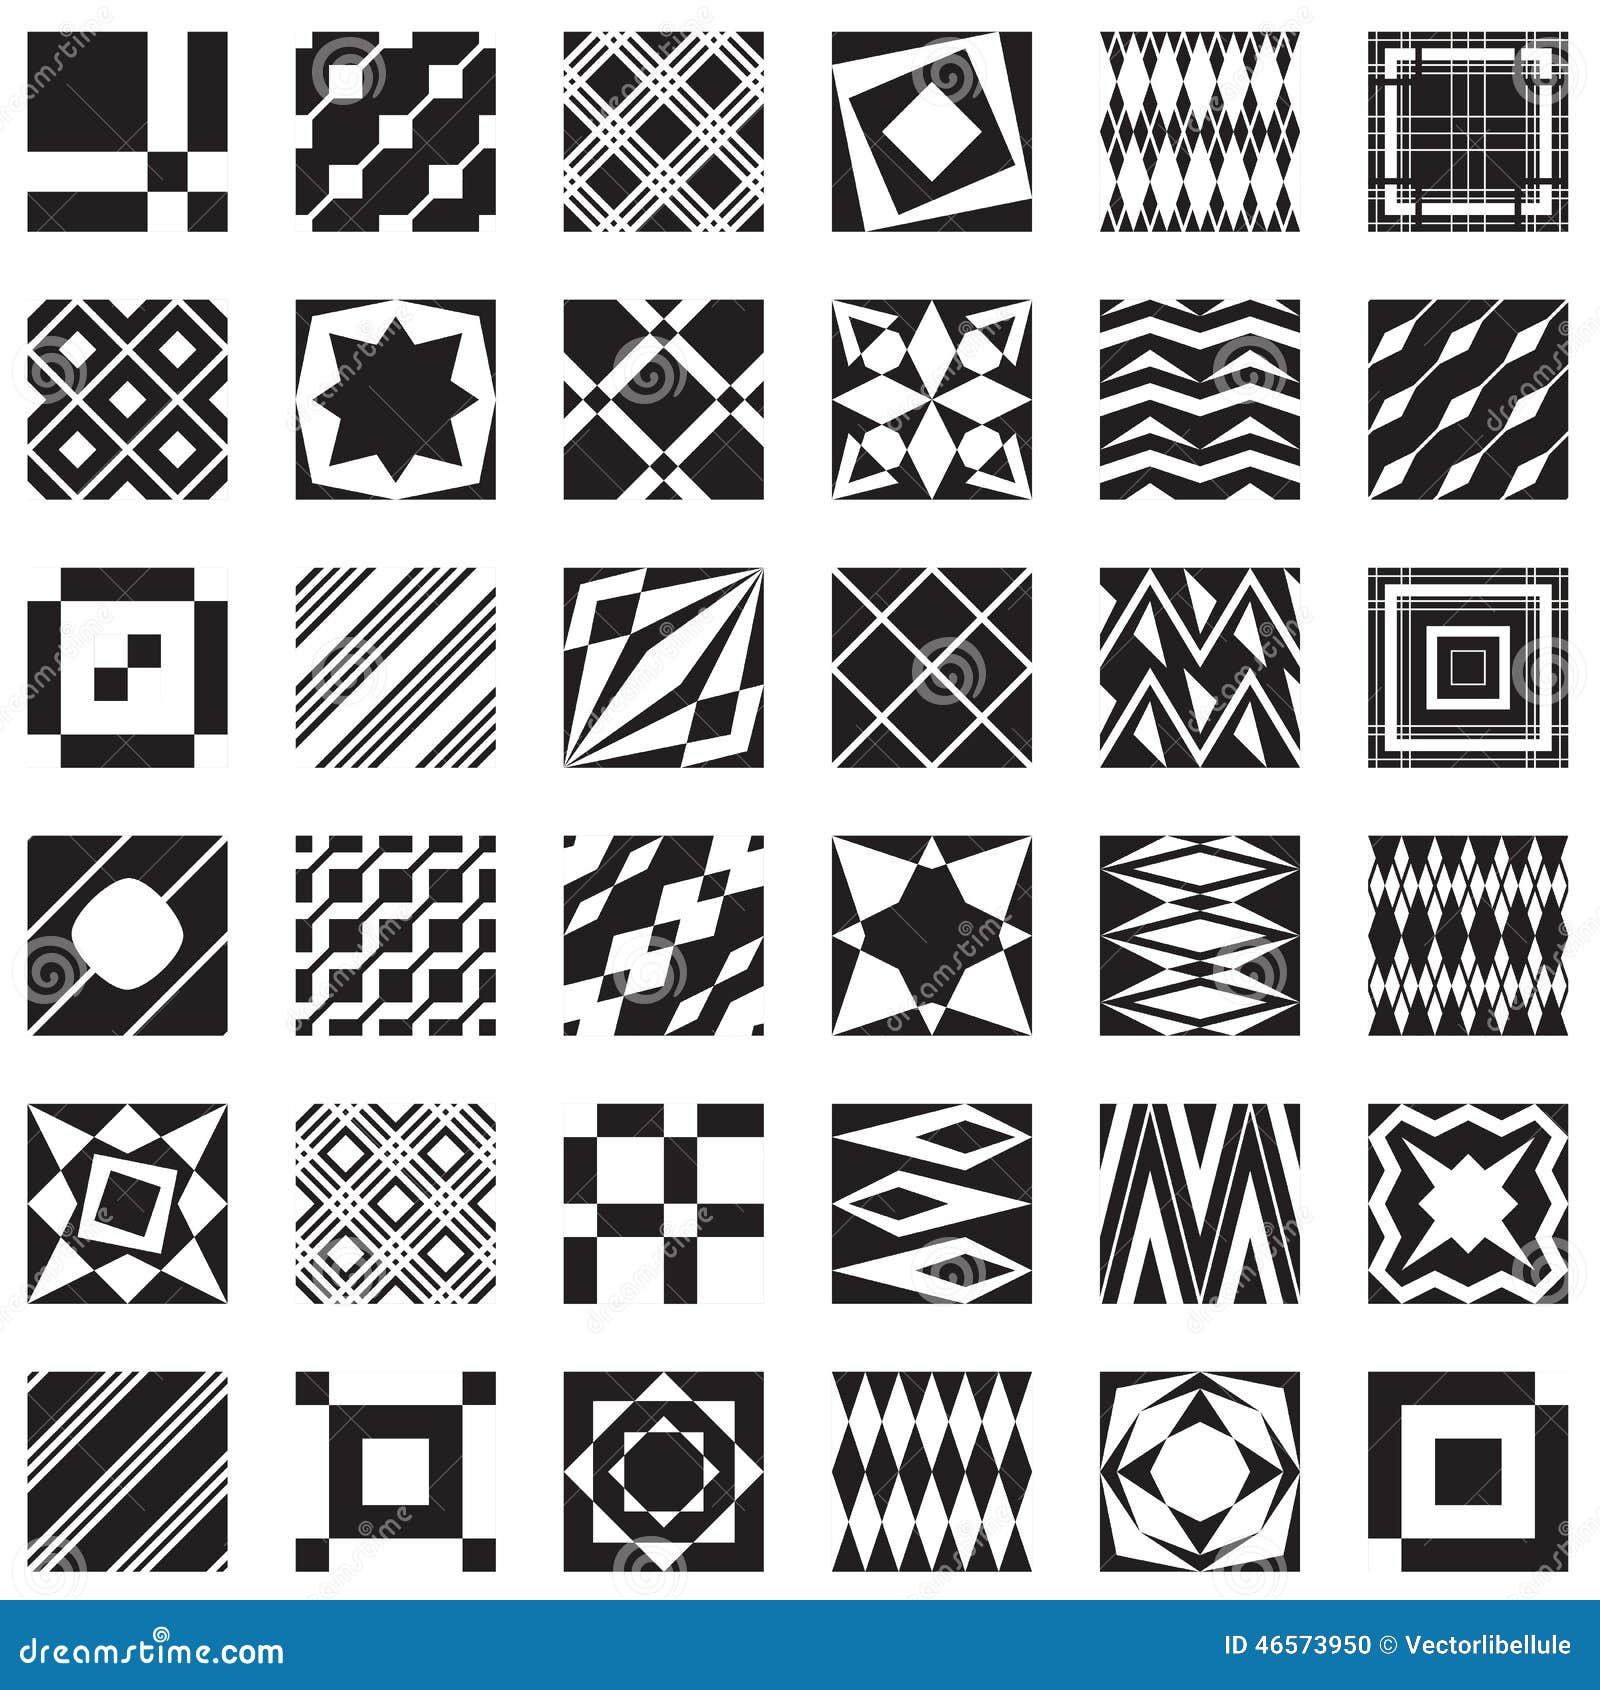 Decorative Elements, Can Be Used As Seamless Patterns Stock Vector ...